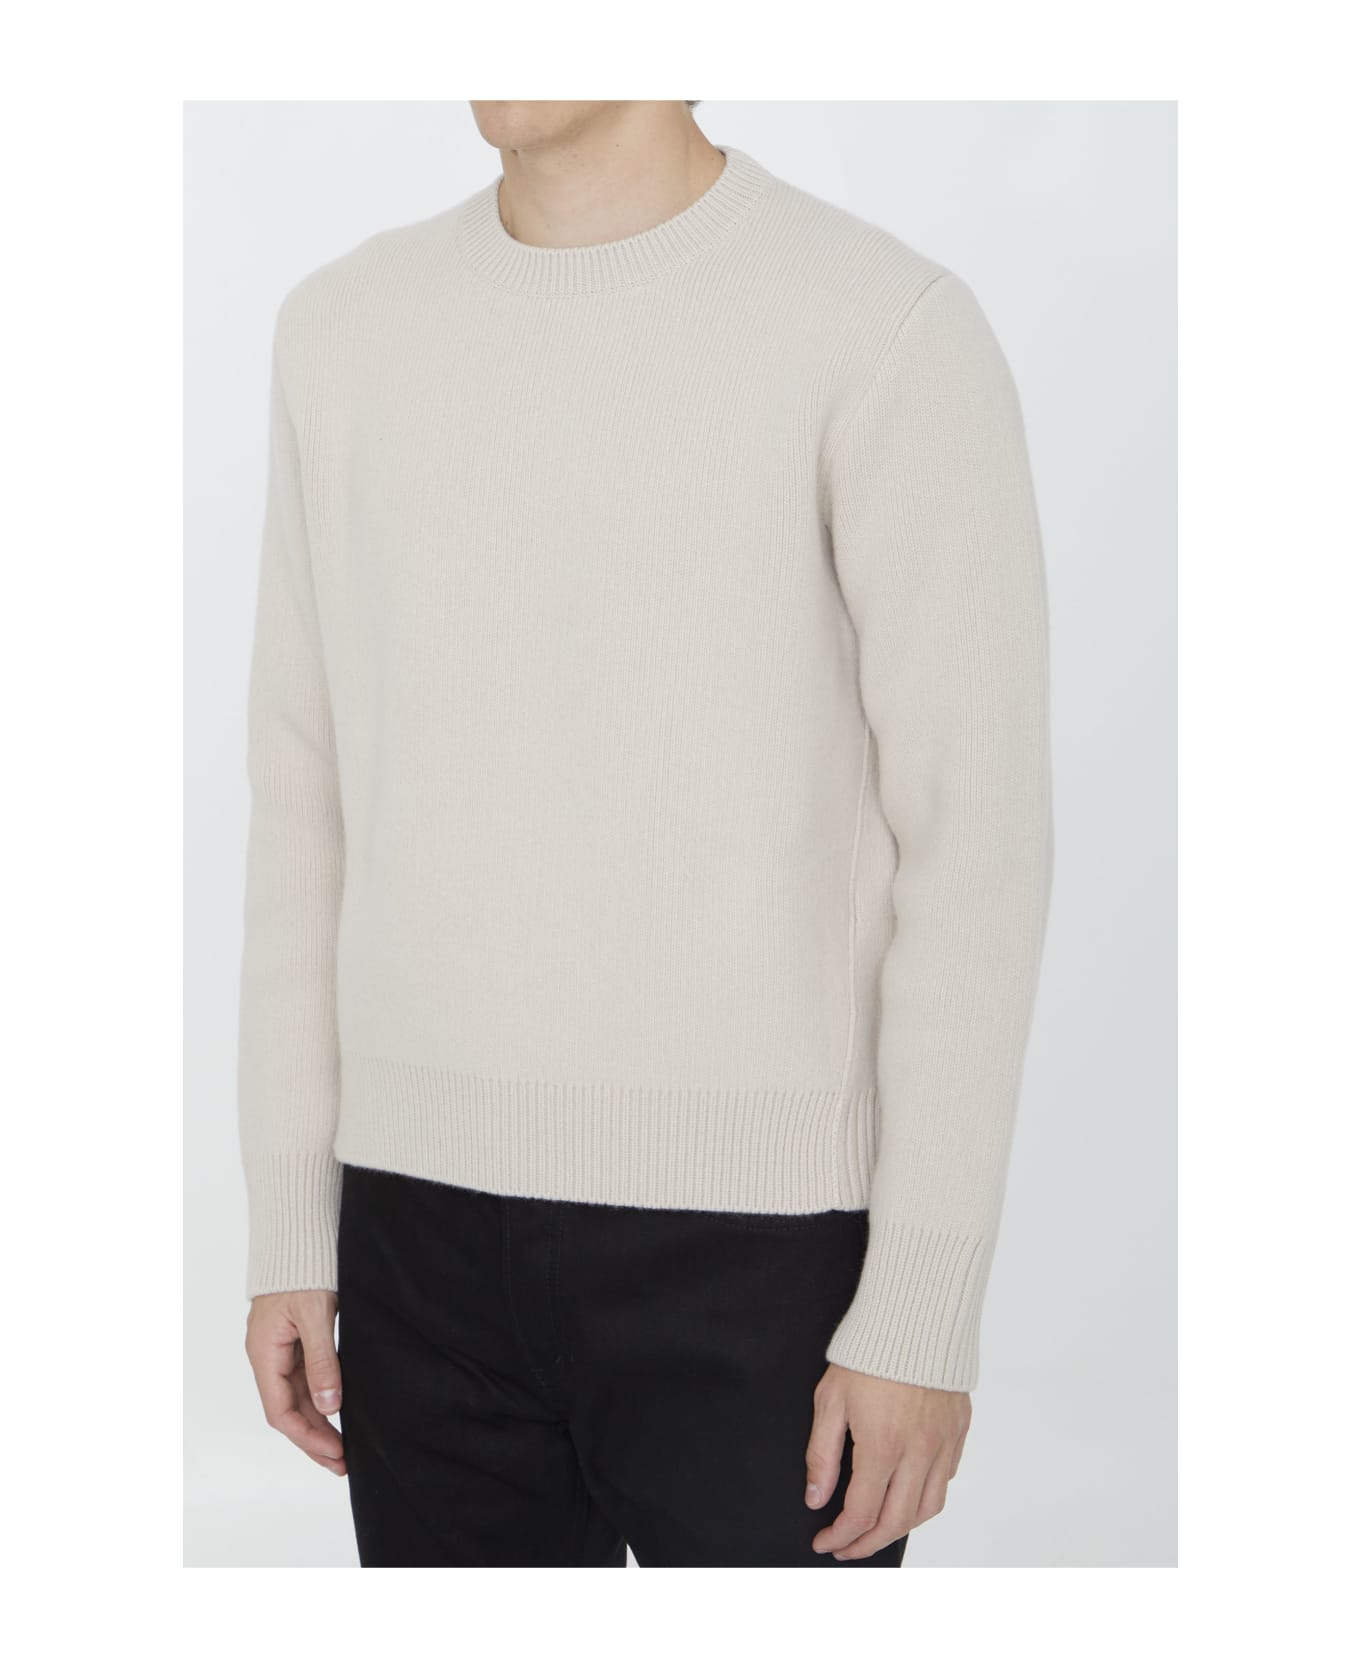 Lanvin Wool And Cashmere Sweater - CREAM ニットウェア